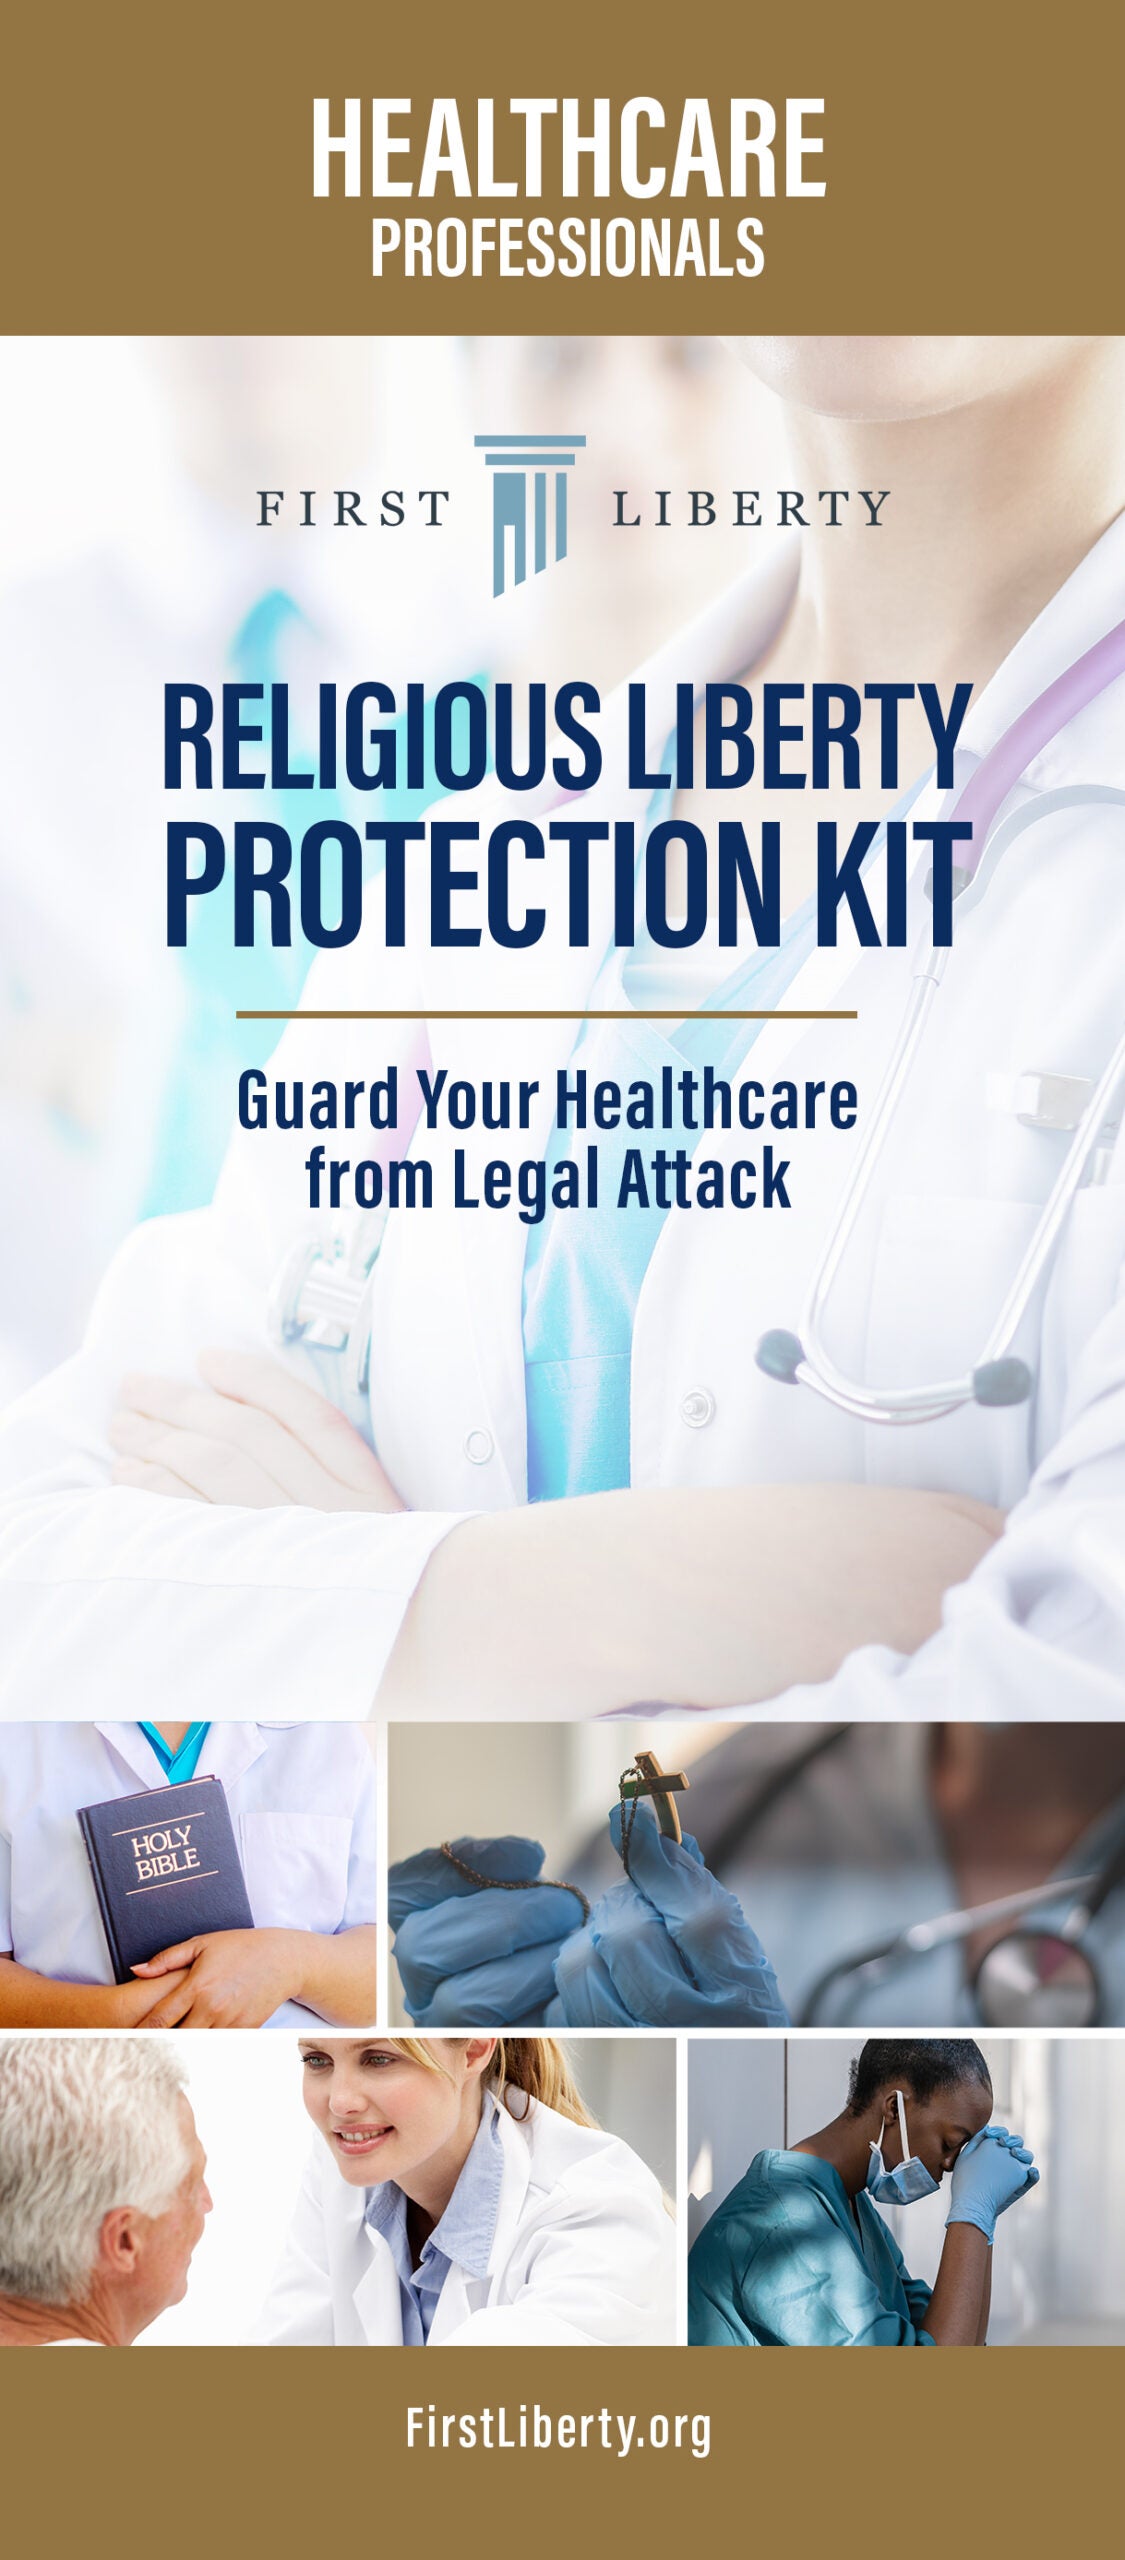 Healthcare Professionals | Protection Kit